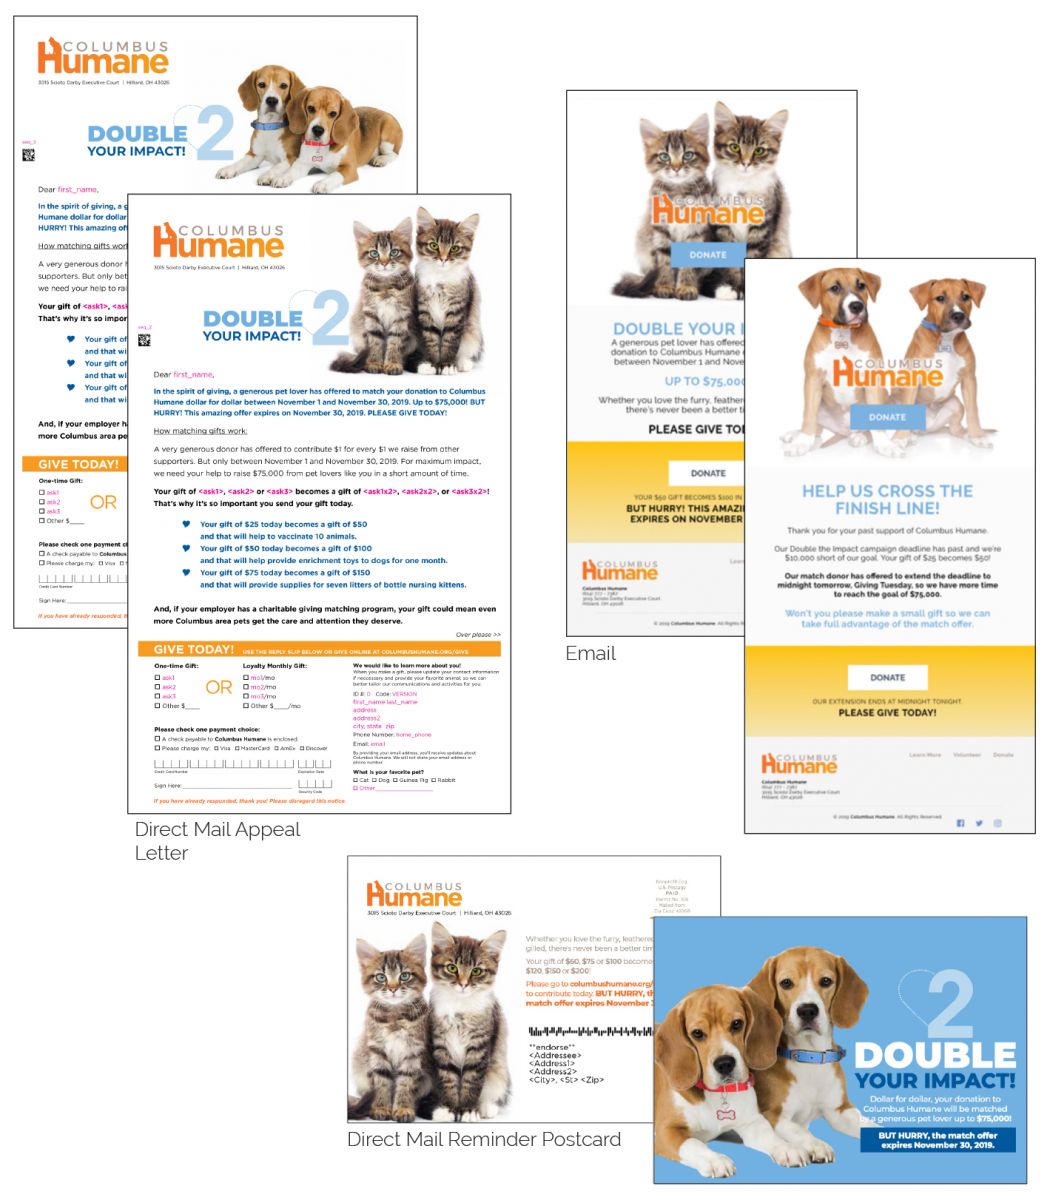 These match appeal letters, postcards and emails were a part of our fundraising campaign for Columbus Humane.